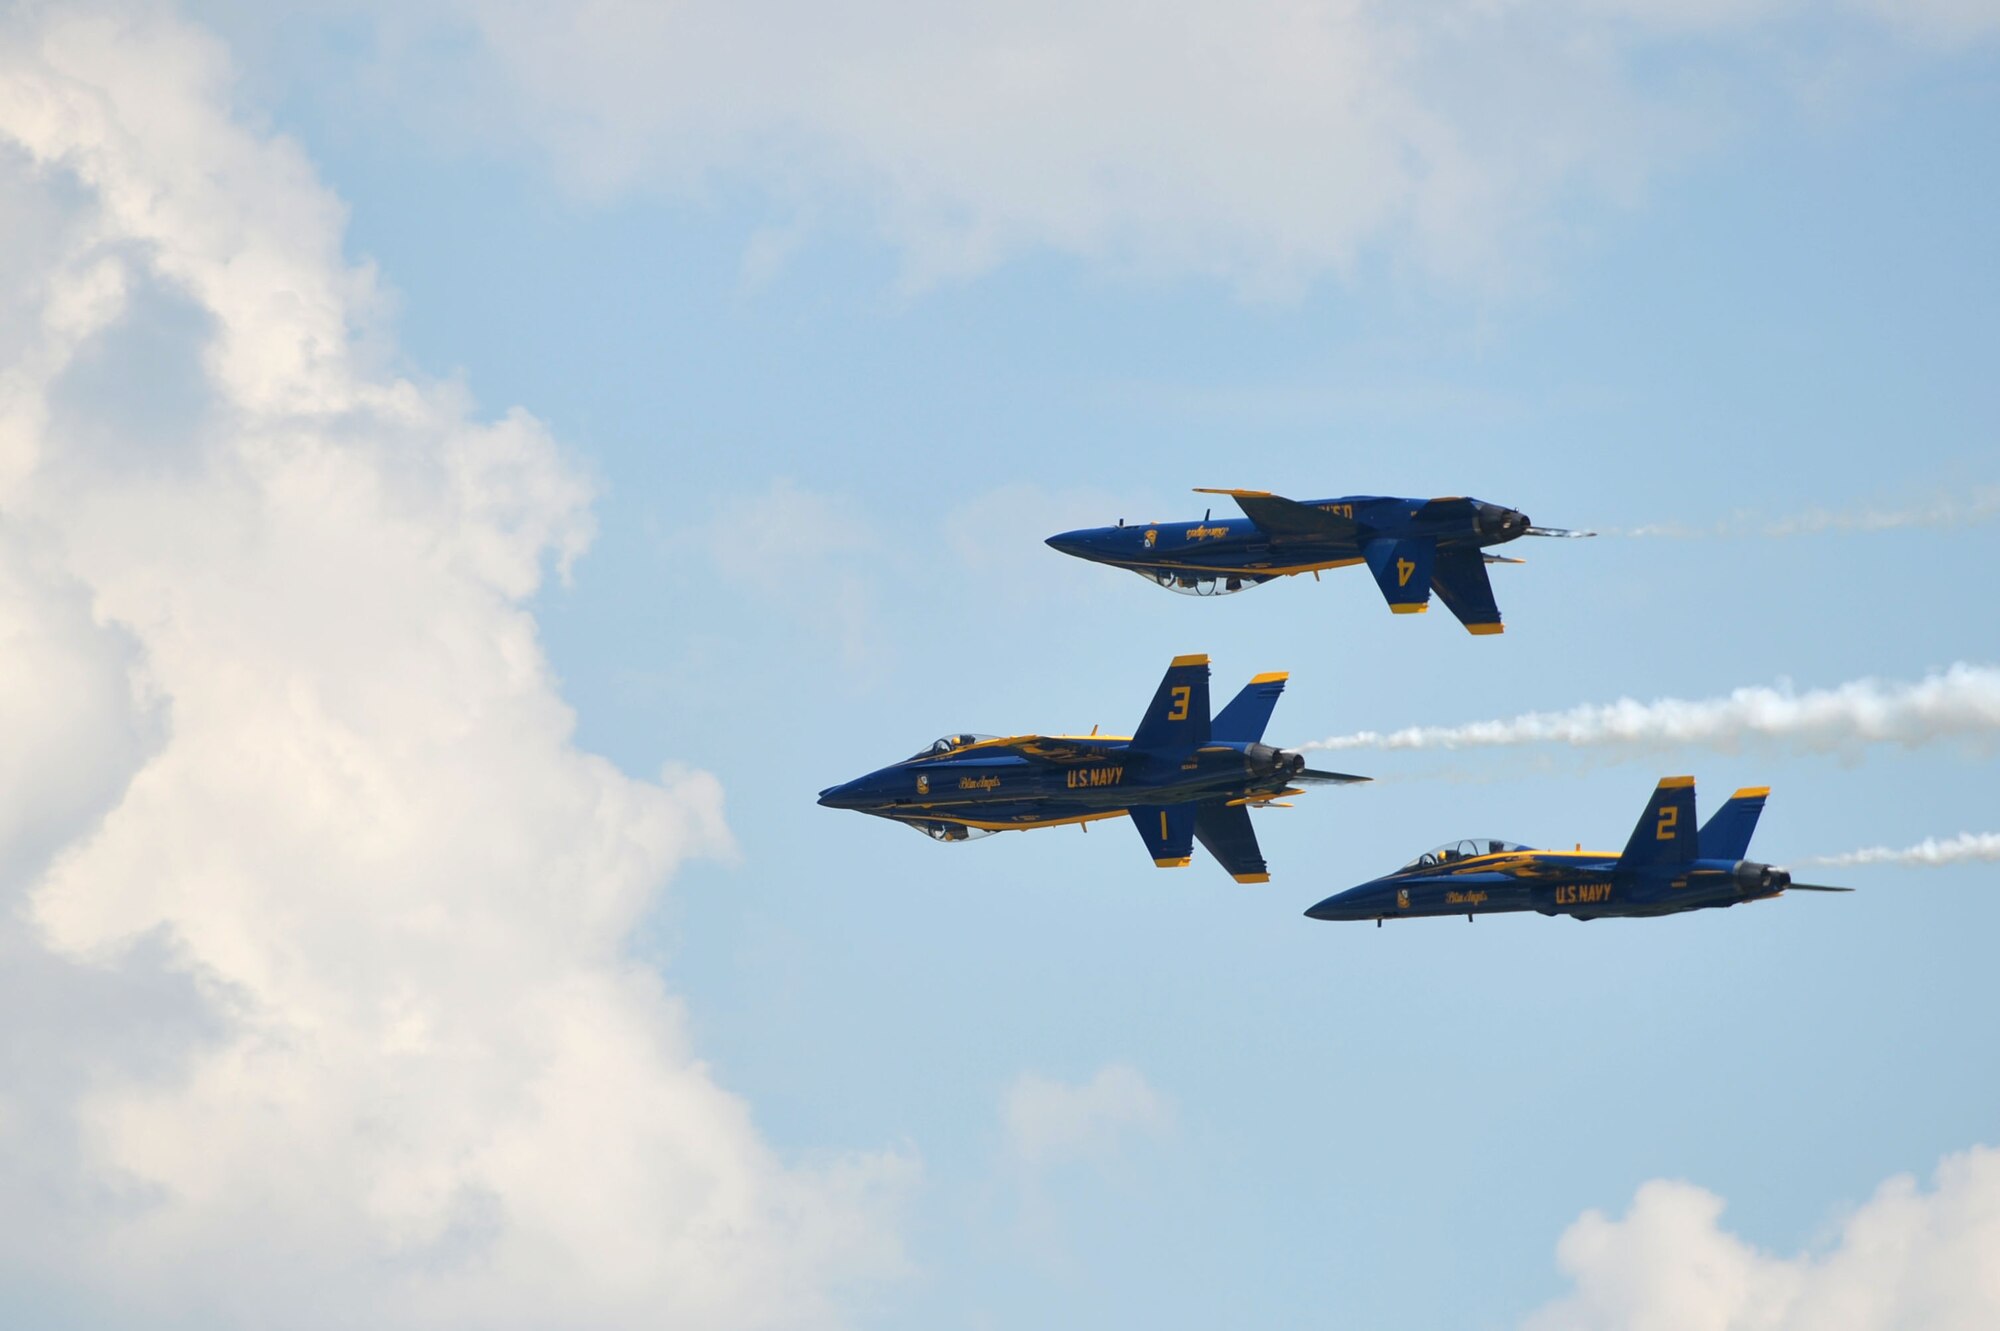 The U.S. Navy Blue Angels perform aerial demonstrations during the Wings Over Wayne Air Show, May 20, 2017, at Seymour Johnson Air Force Base, North Carolina. The Blue Angels team consists of 17 officers and more than 100 enlisted Sailors and Marines who serve support and maintenance roles. (U.S. Air Force photo by Airman 1st Class Christopher Maldonado)